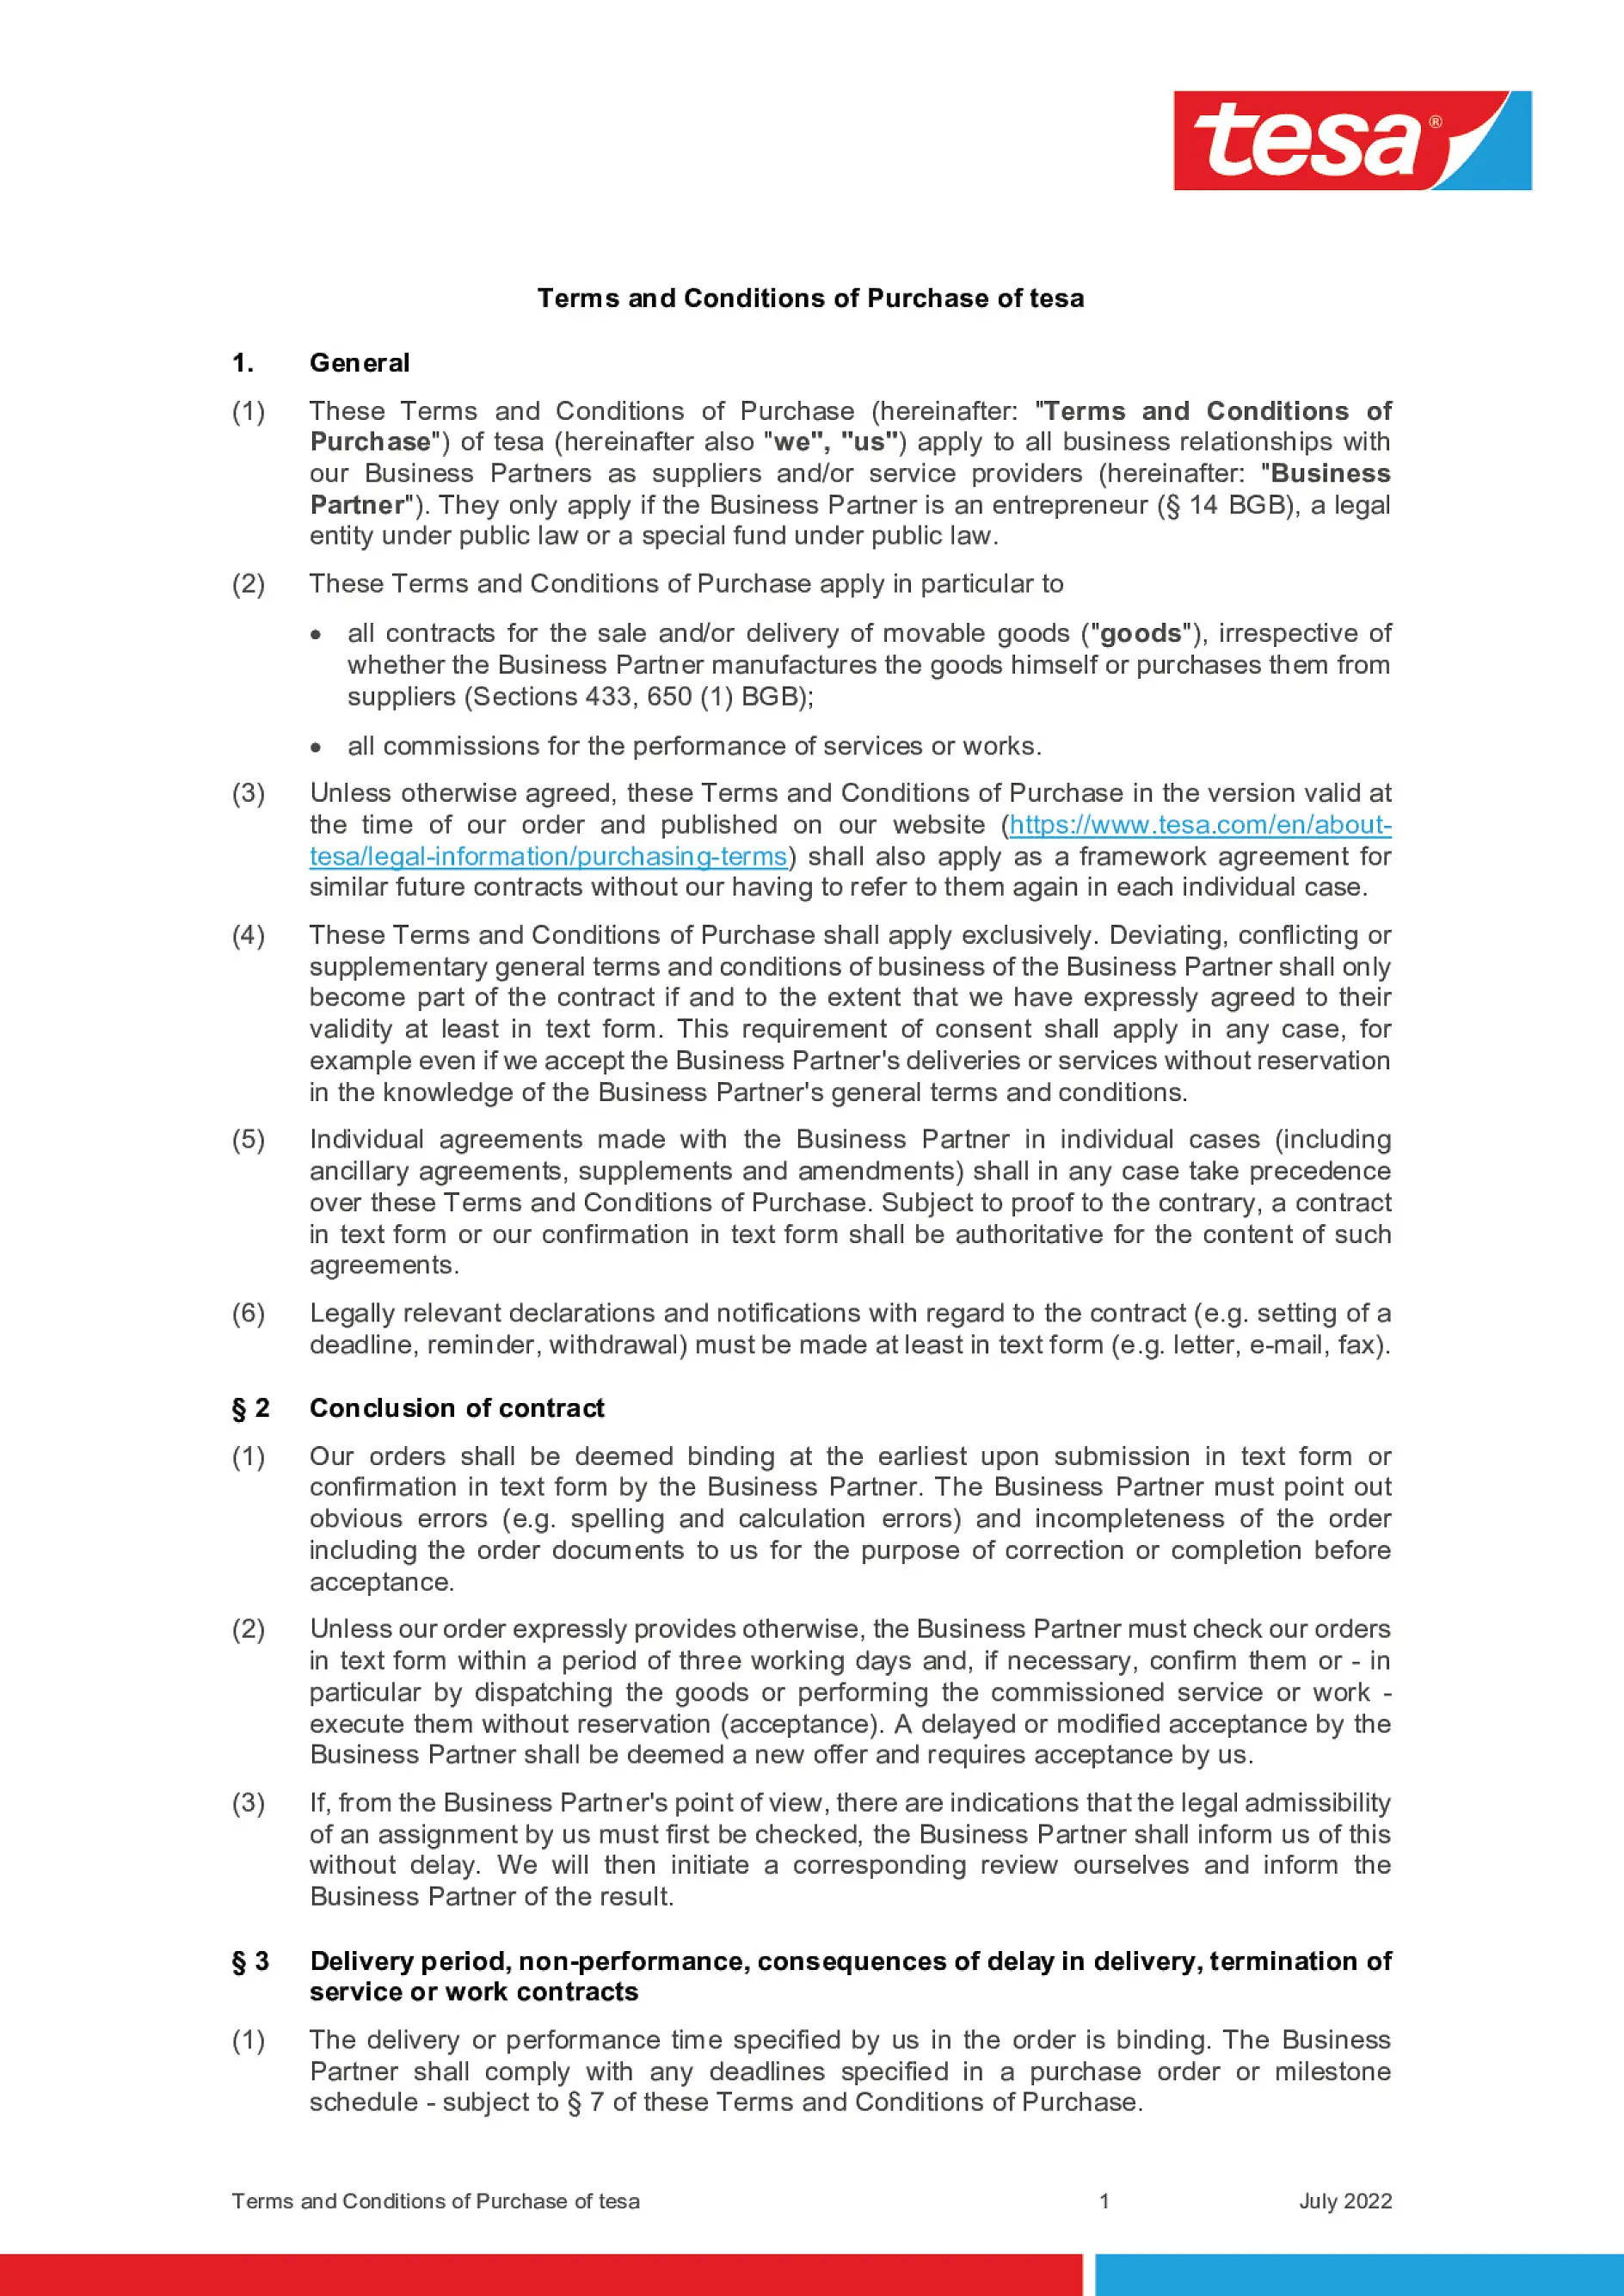 Terms and Conditions of Purchase of tesa SE English April 2021